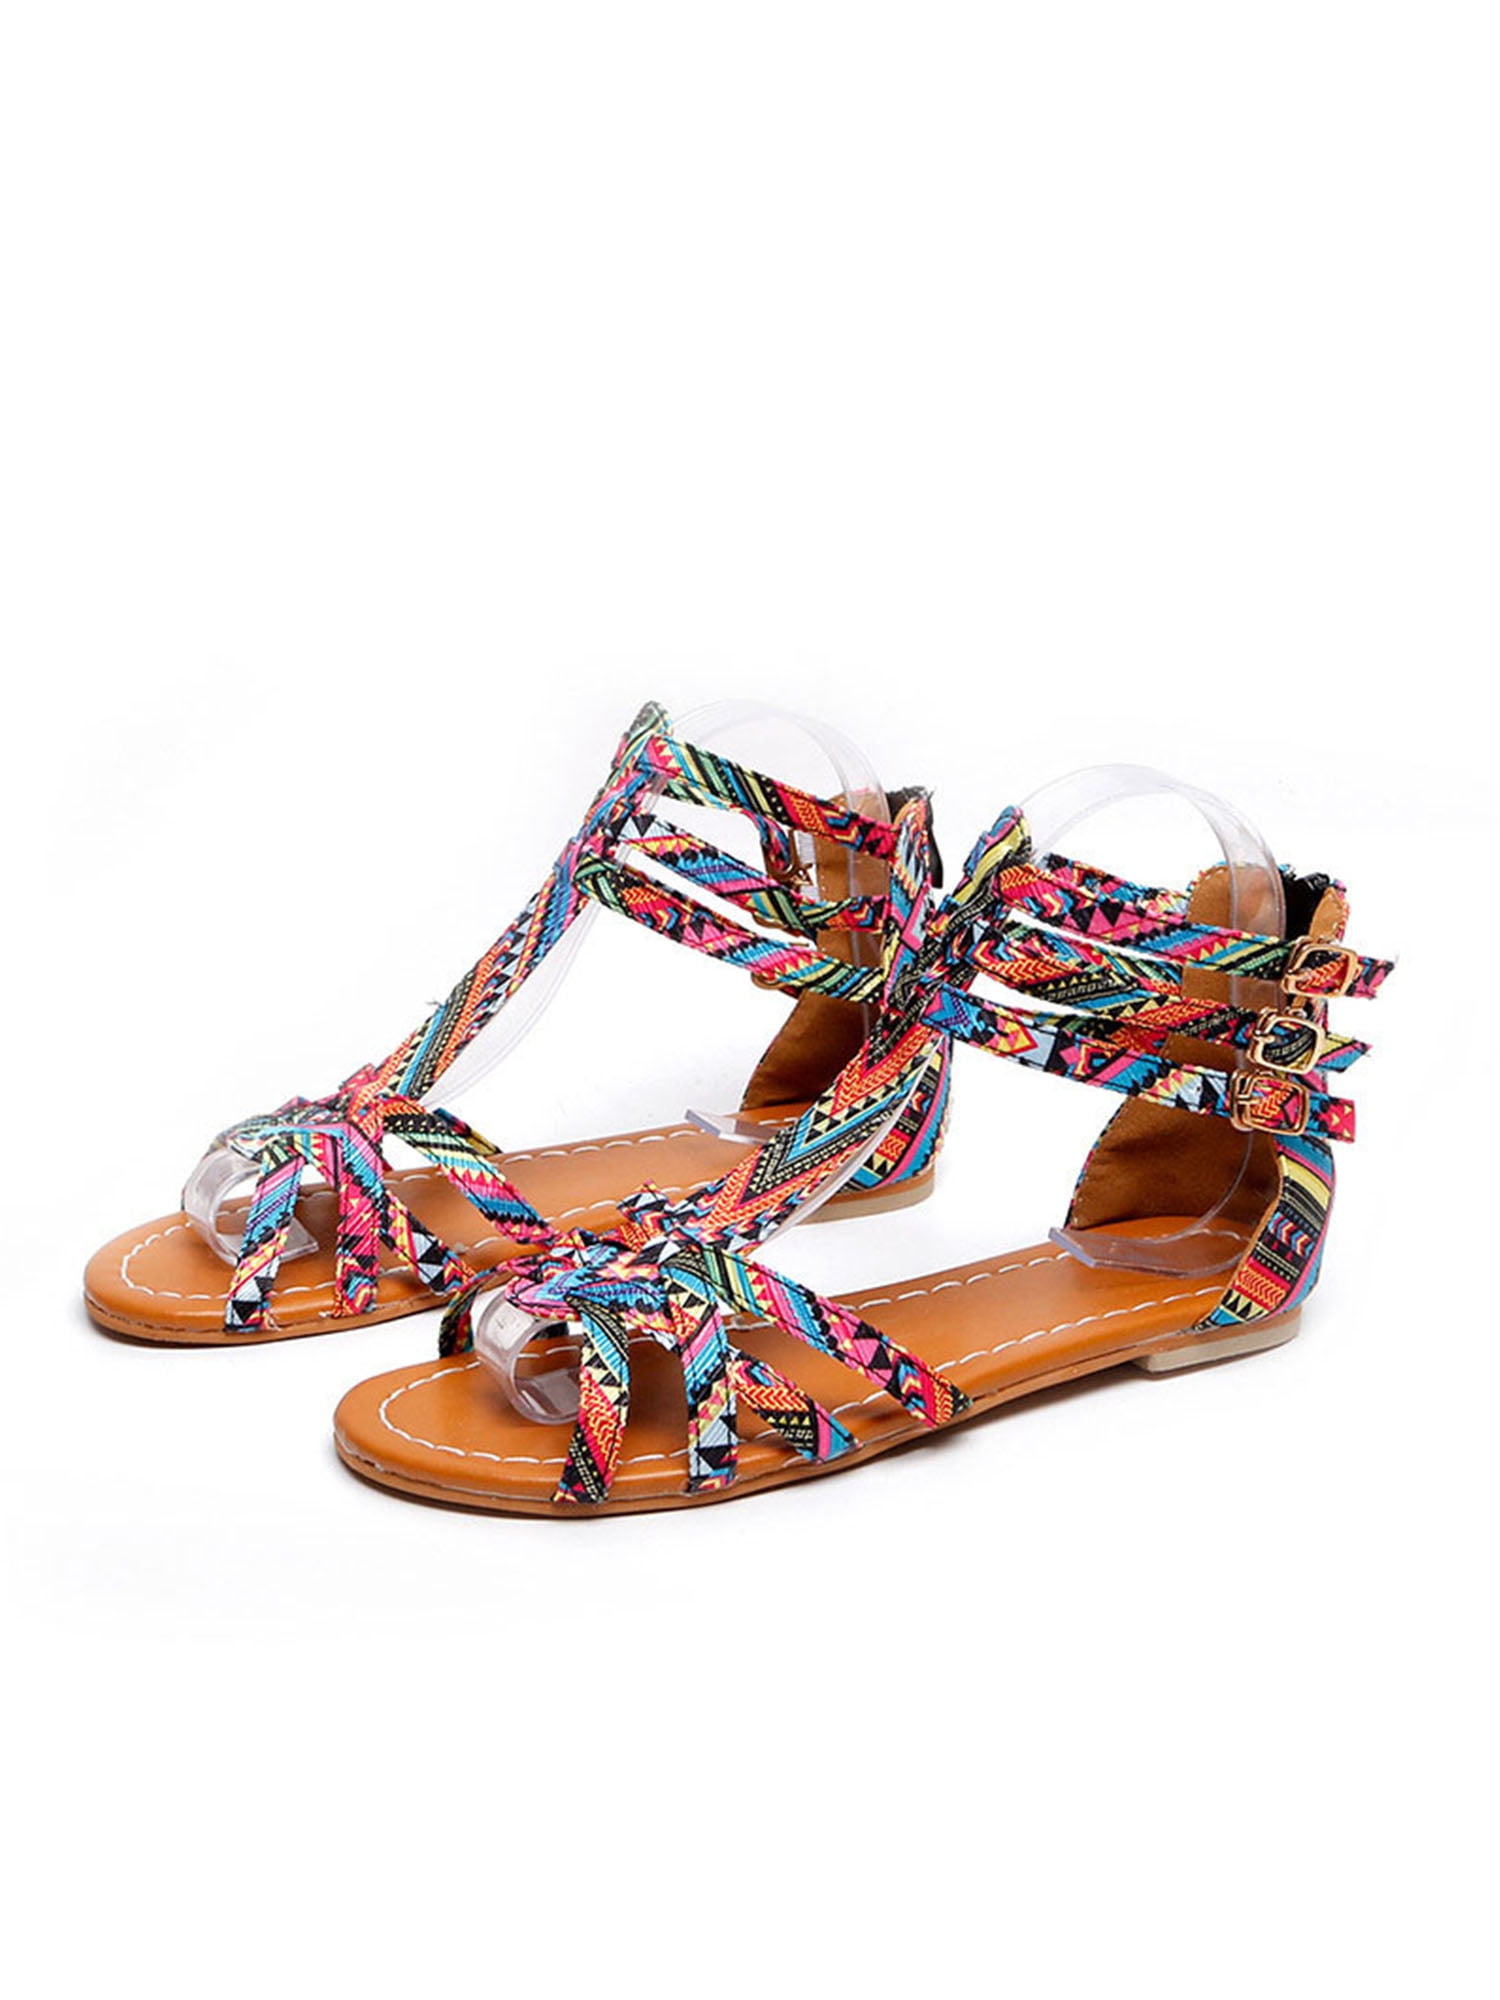 New Women striped gladiator flats  sandals open toe party shoes 